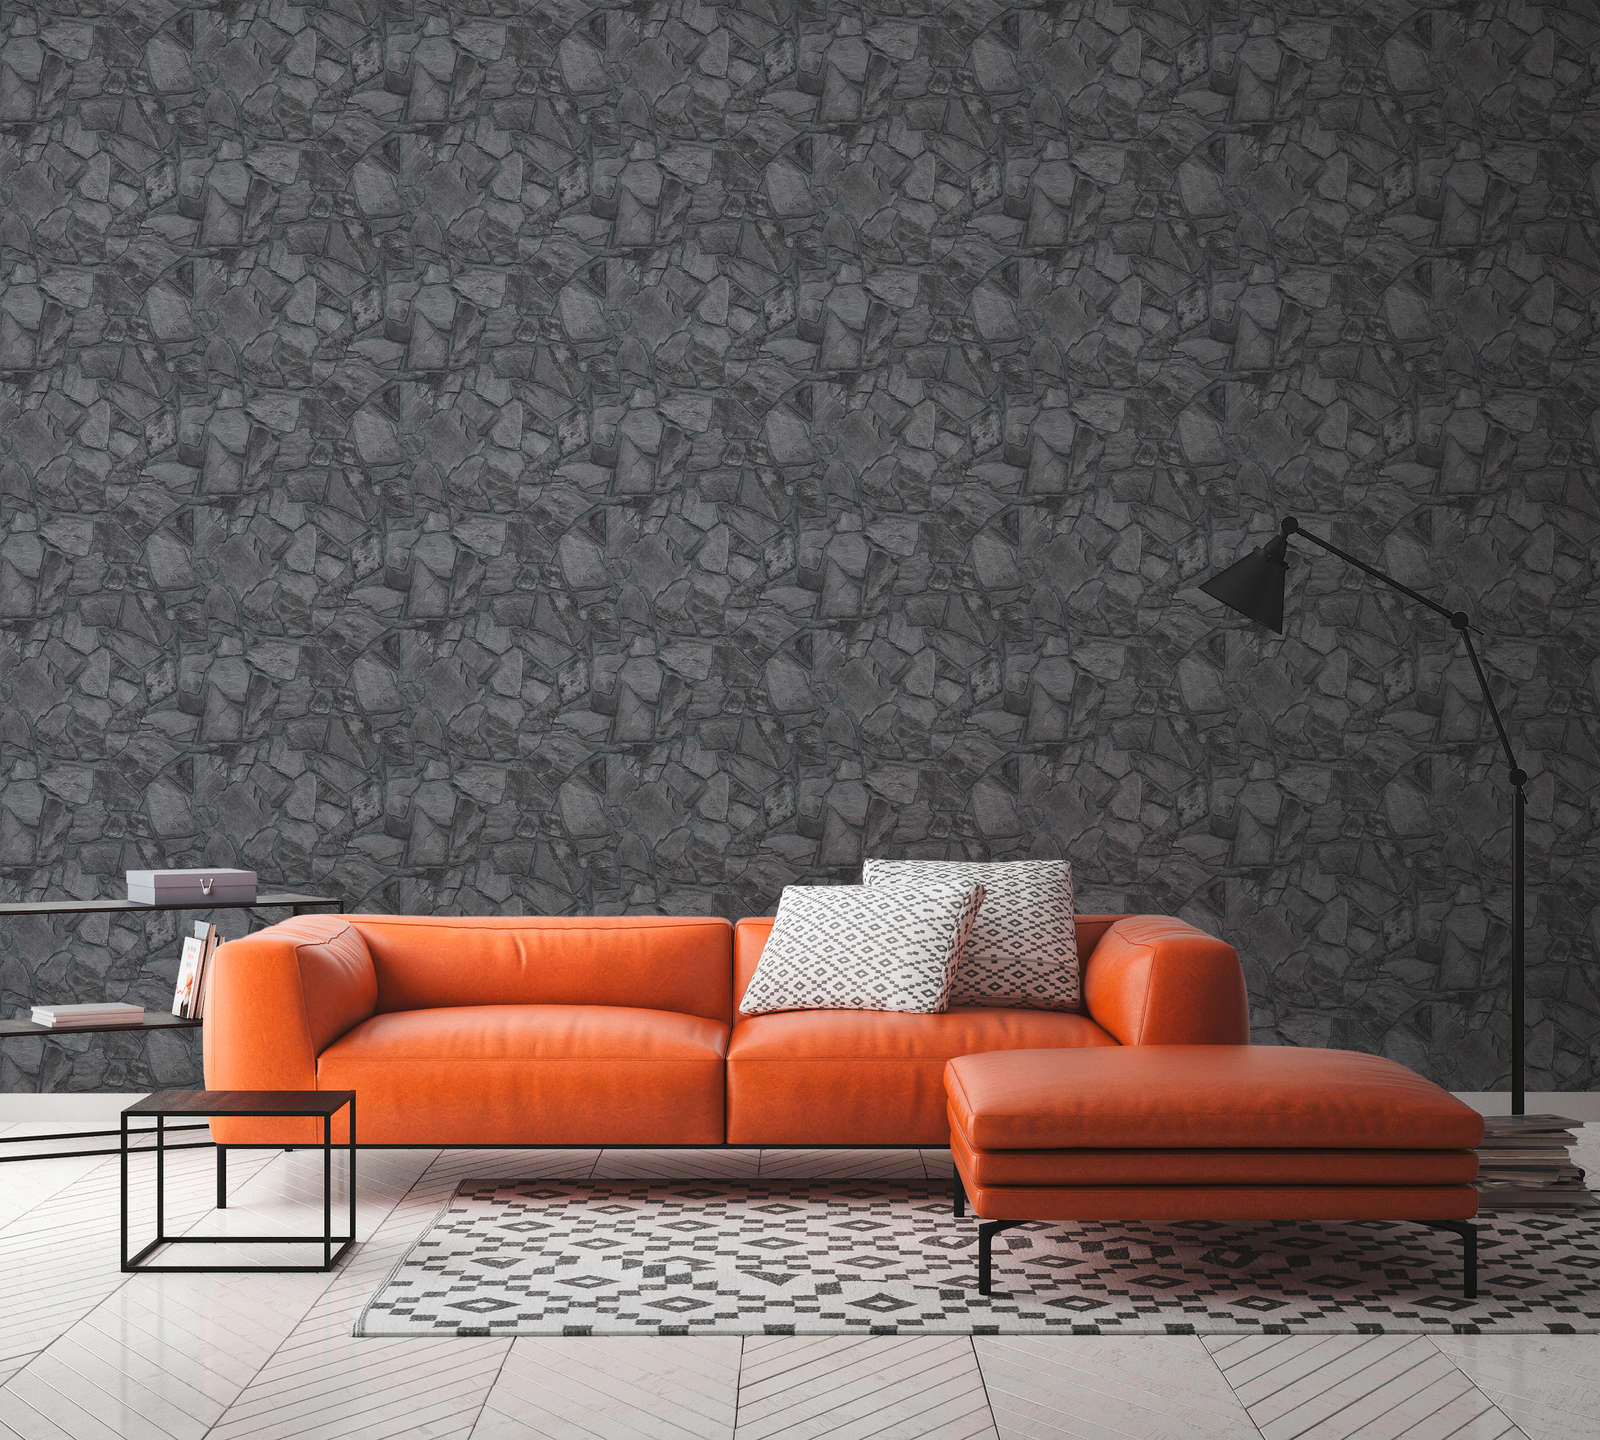             Wallpaper with black natural stone look
        